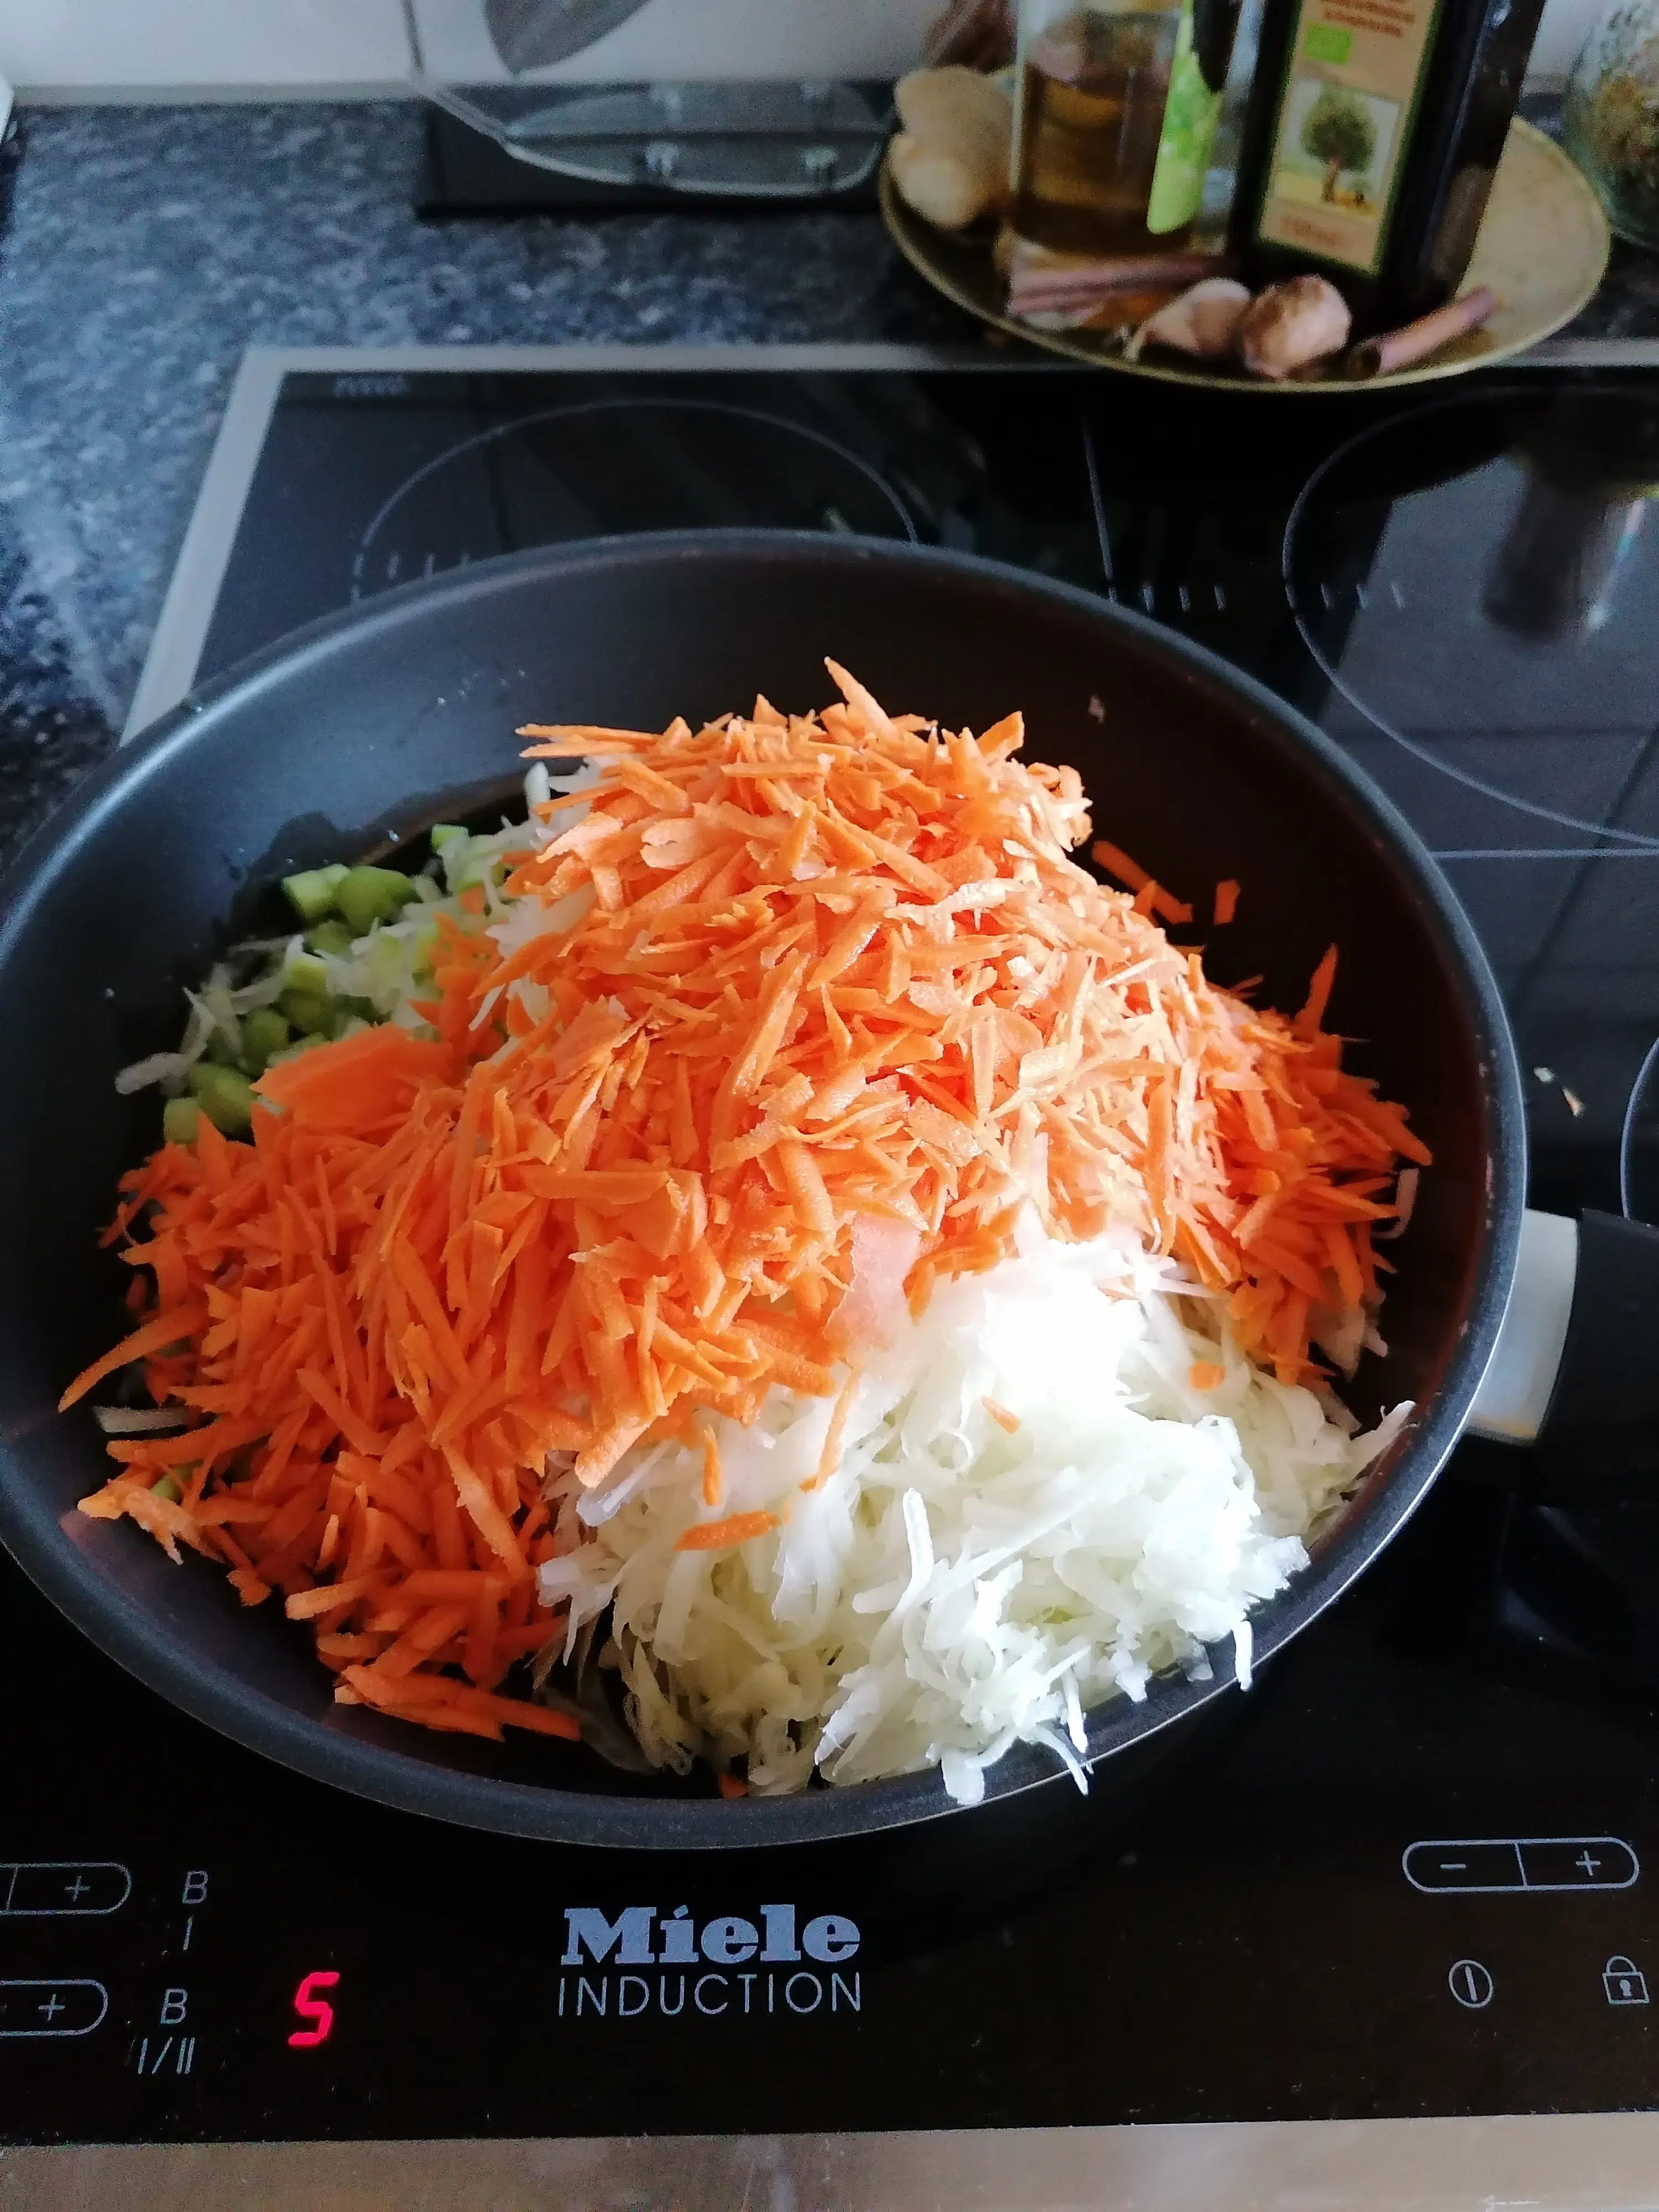 A captivating photo displaying the vivid colors of grated kohlrabi and grated carrots sizzling in a pan on a stove. The vibrant green and white shreds of kohlrabi harmoniously blend with the rich orange hues of the carrots, creating a visually enticing and nutritious mixture ready to be used in a delectable culinary masterpiece.